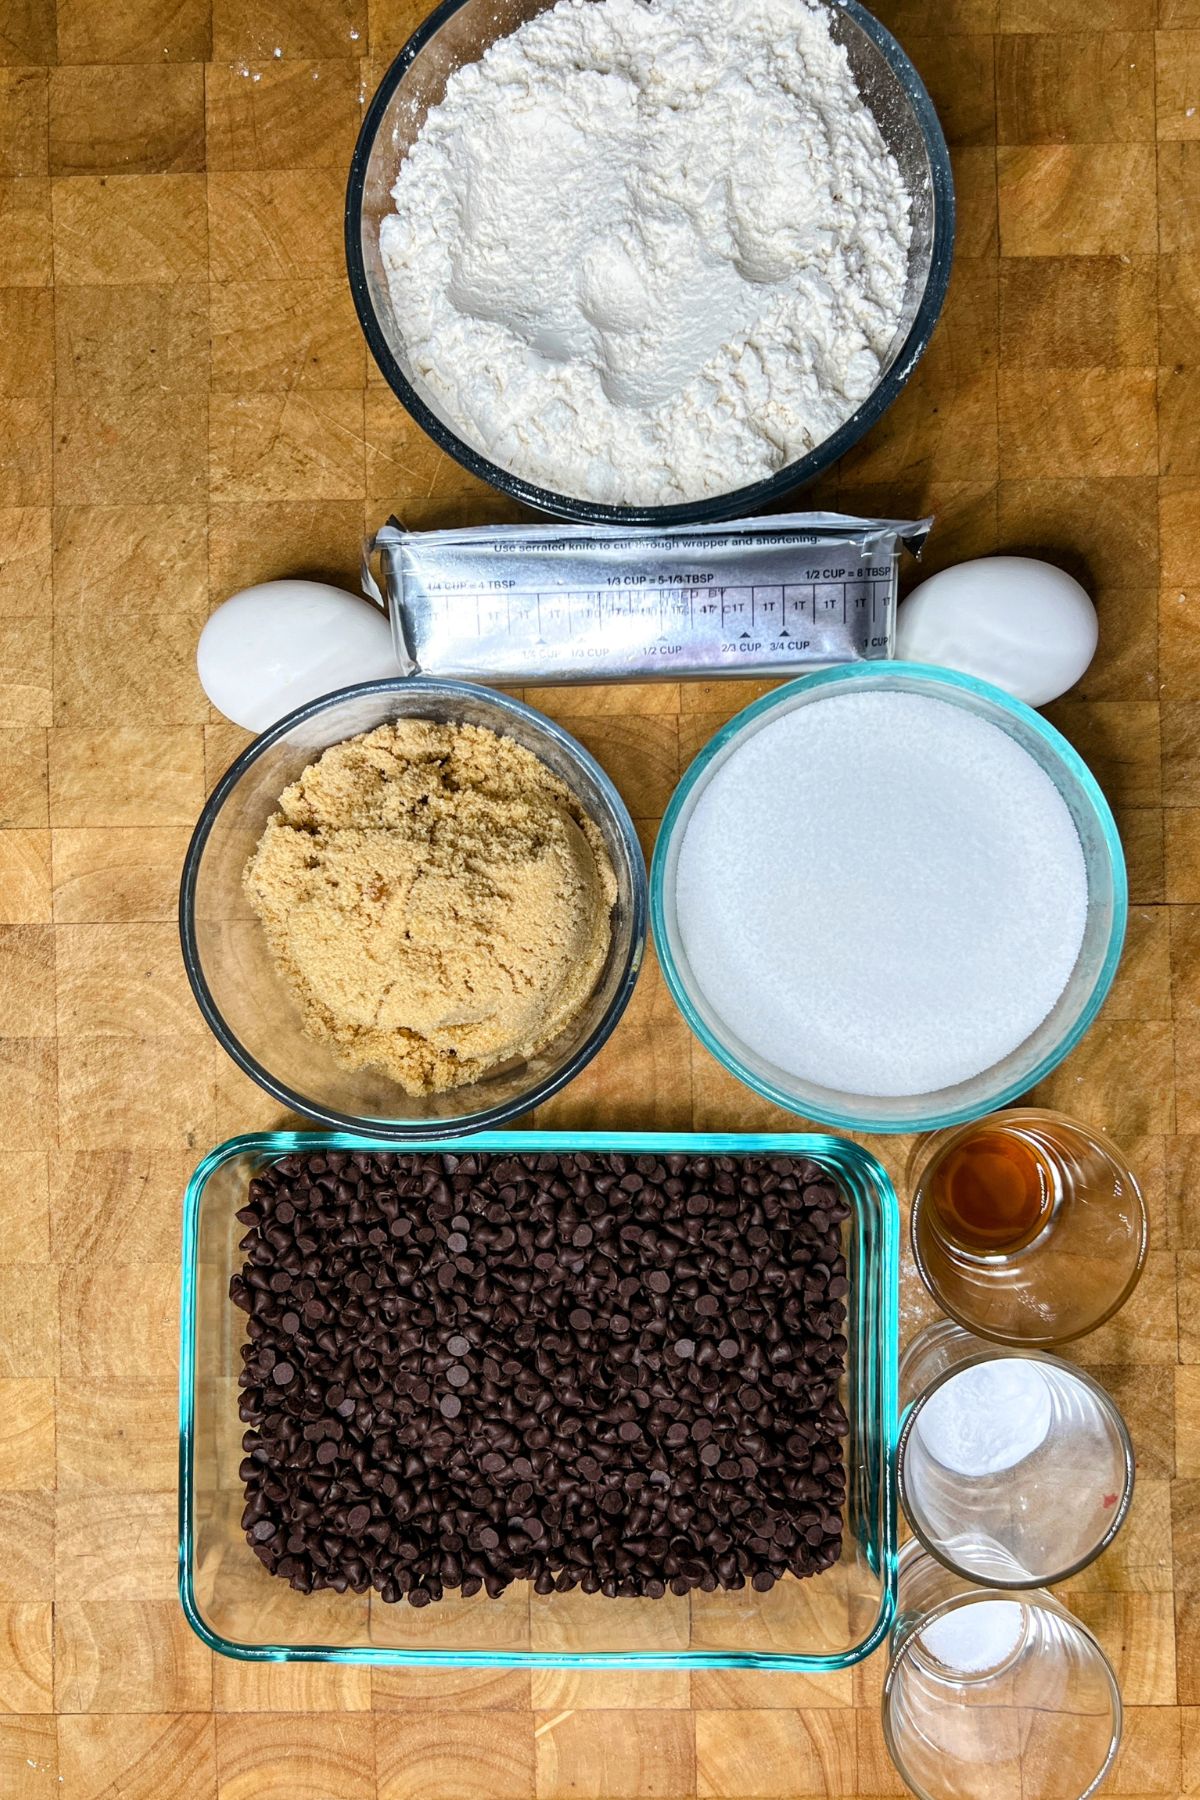 Crisco chocolate chip cookie ingredients on a wooden table.